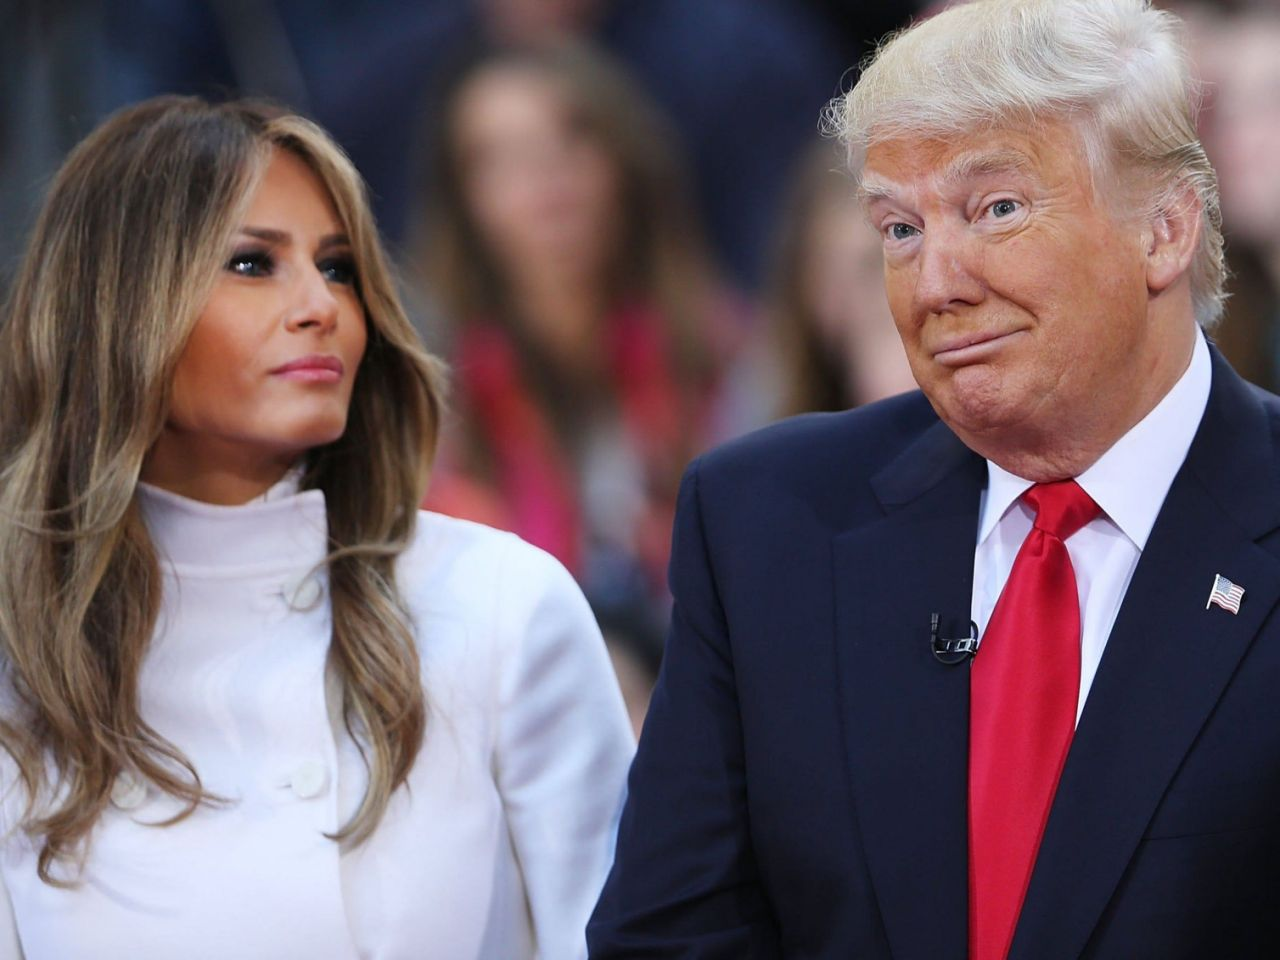 Melania Trump reportedly refused to leave Covid-19 isolation in order to keep from infecting Secret Service agents